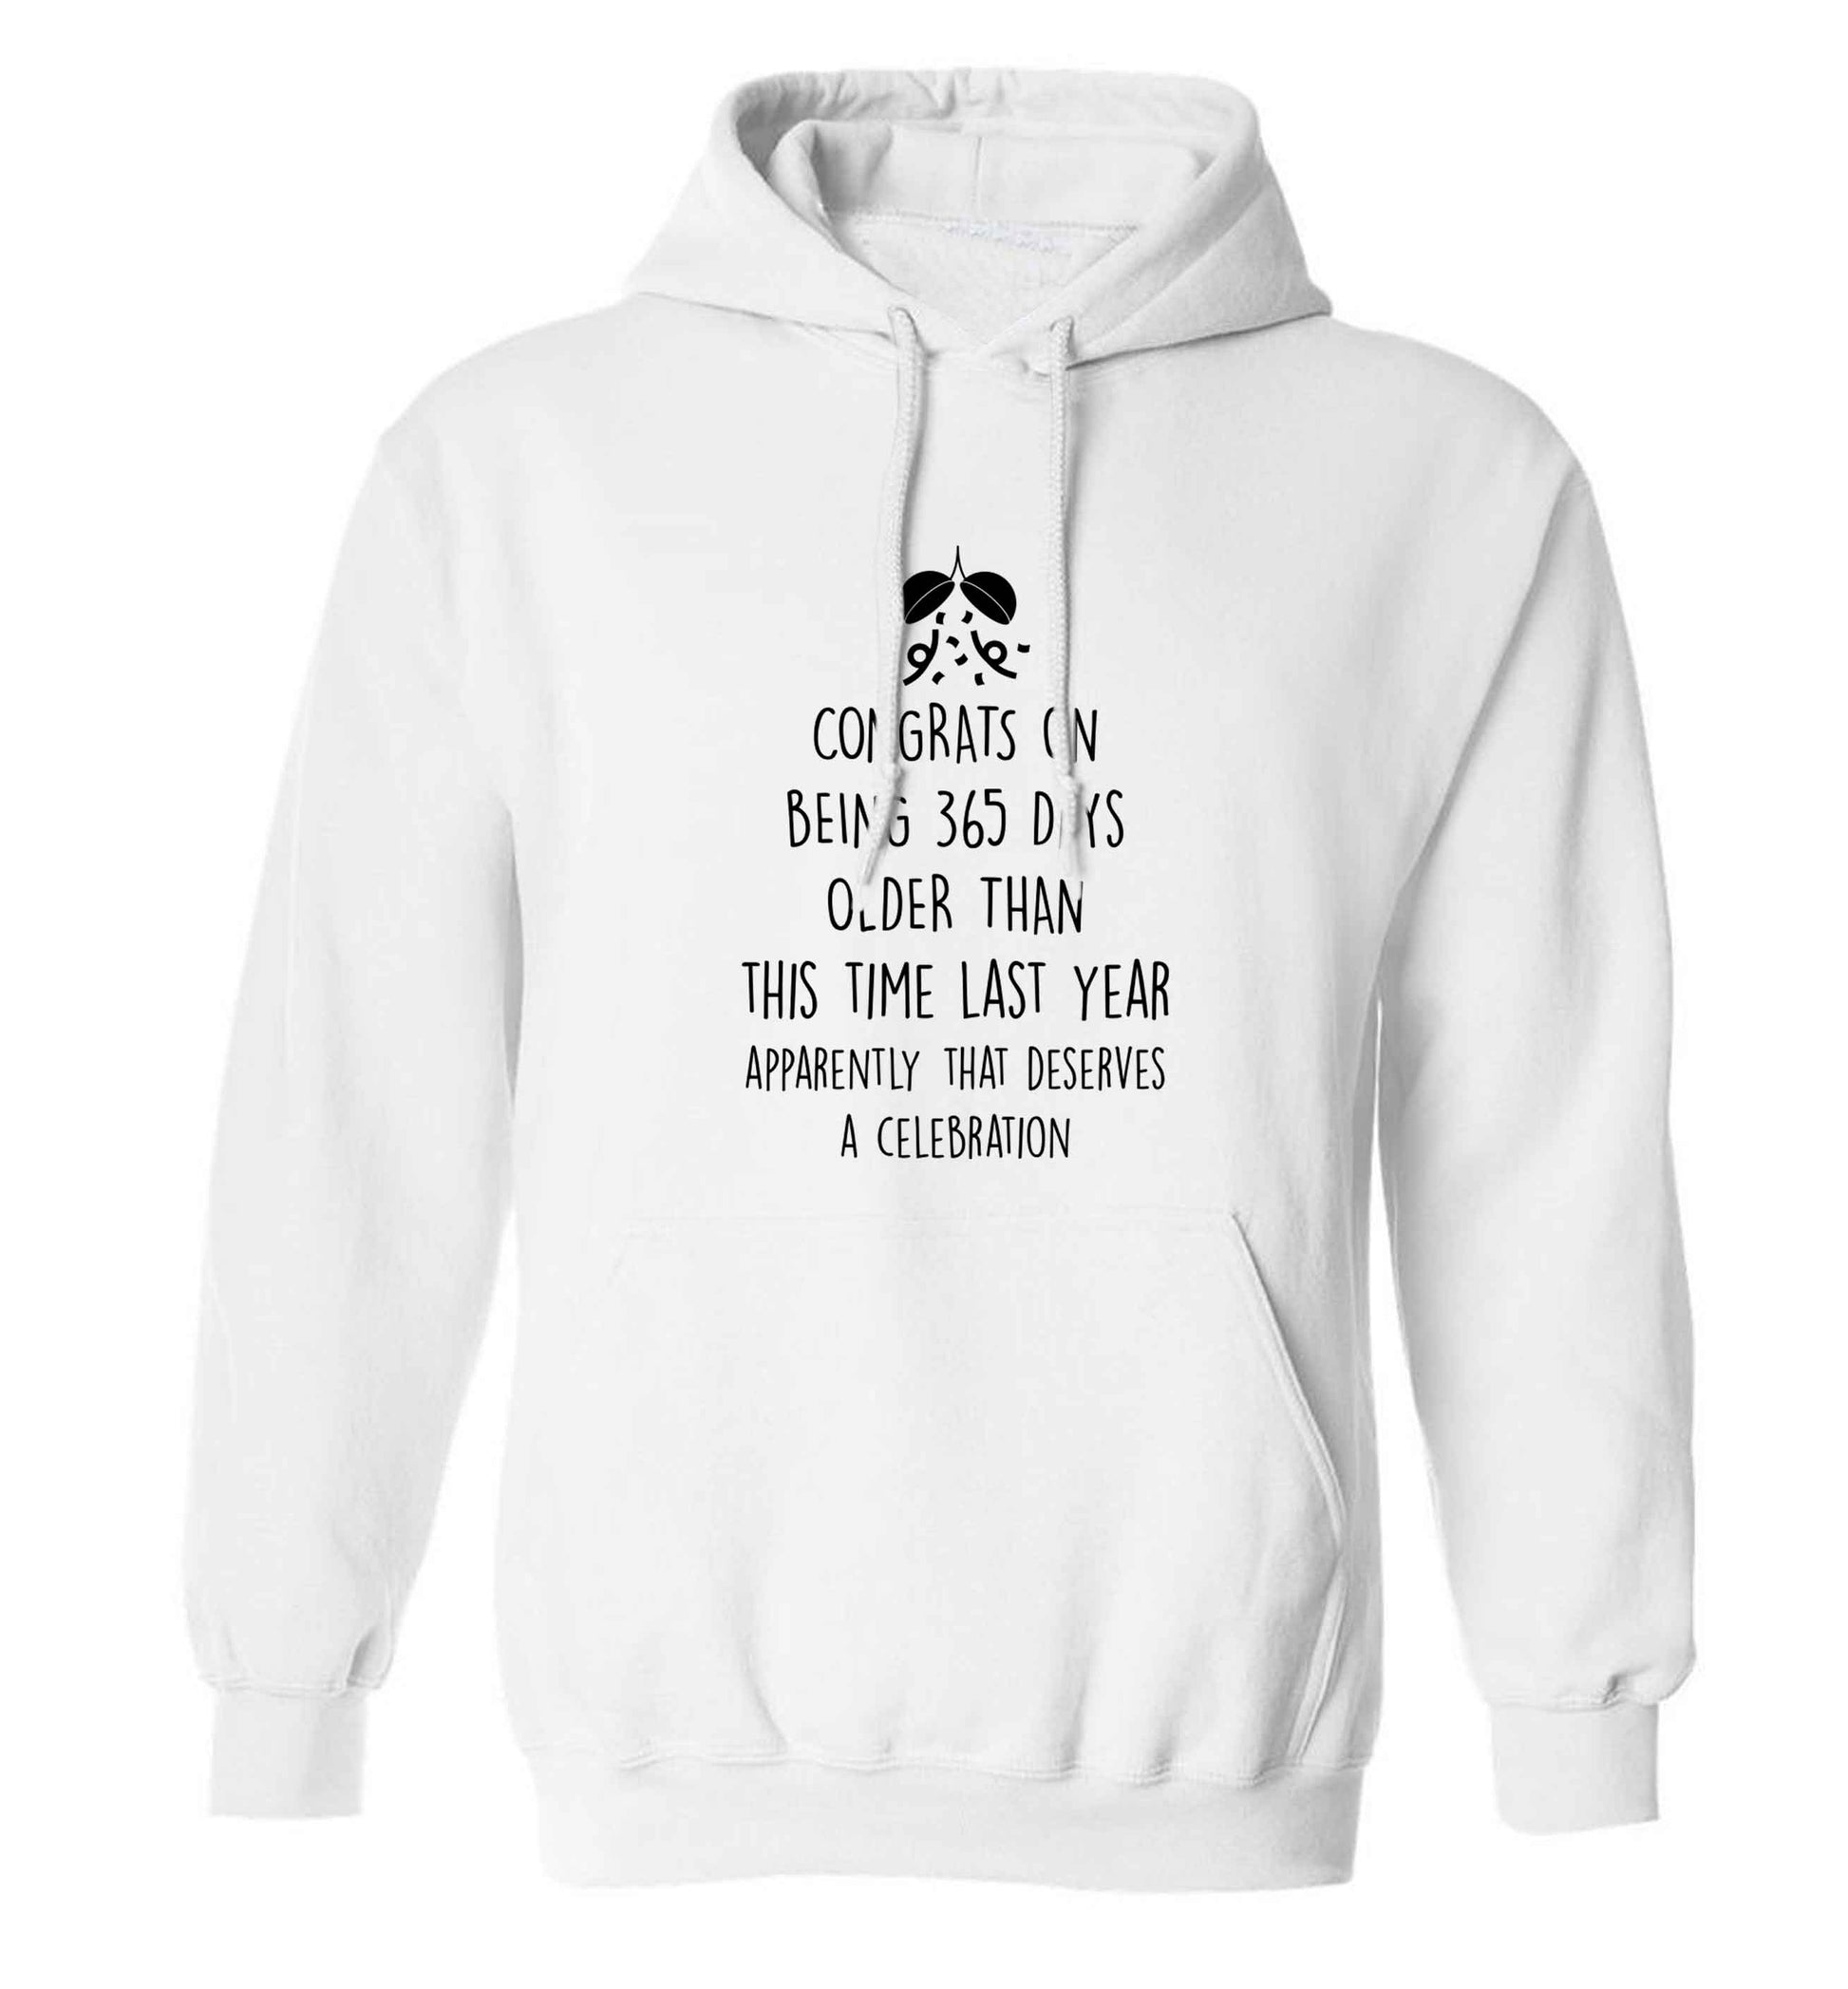 Congrats on being 365 days older than you were this time last year apparently that deserves a celebration adults unisex white hoodie 2XL